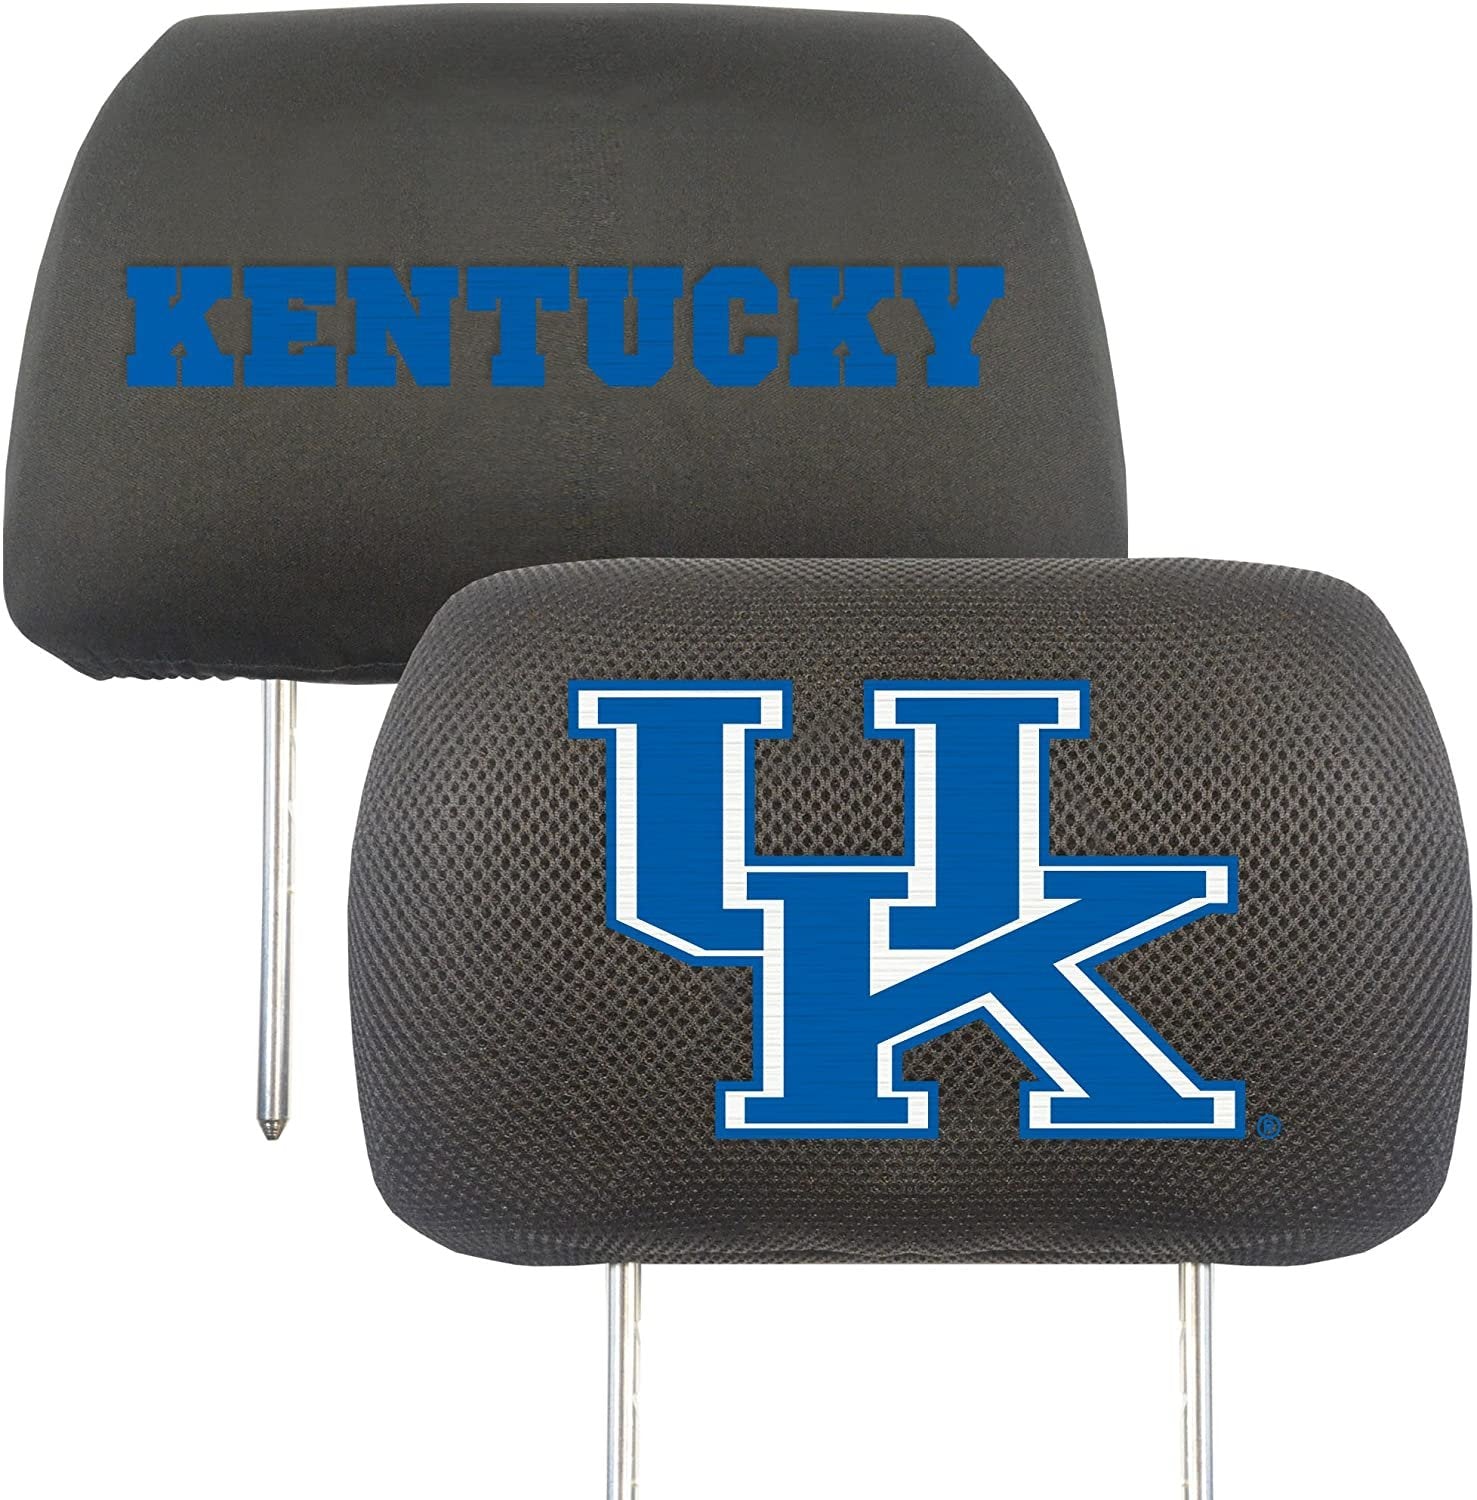 University of Kentucky Wildcats Pair of Premium Auto Head Rest Covers, Embroidered, Black Elastic, 14x10 Inch